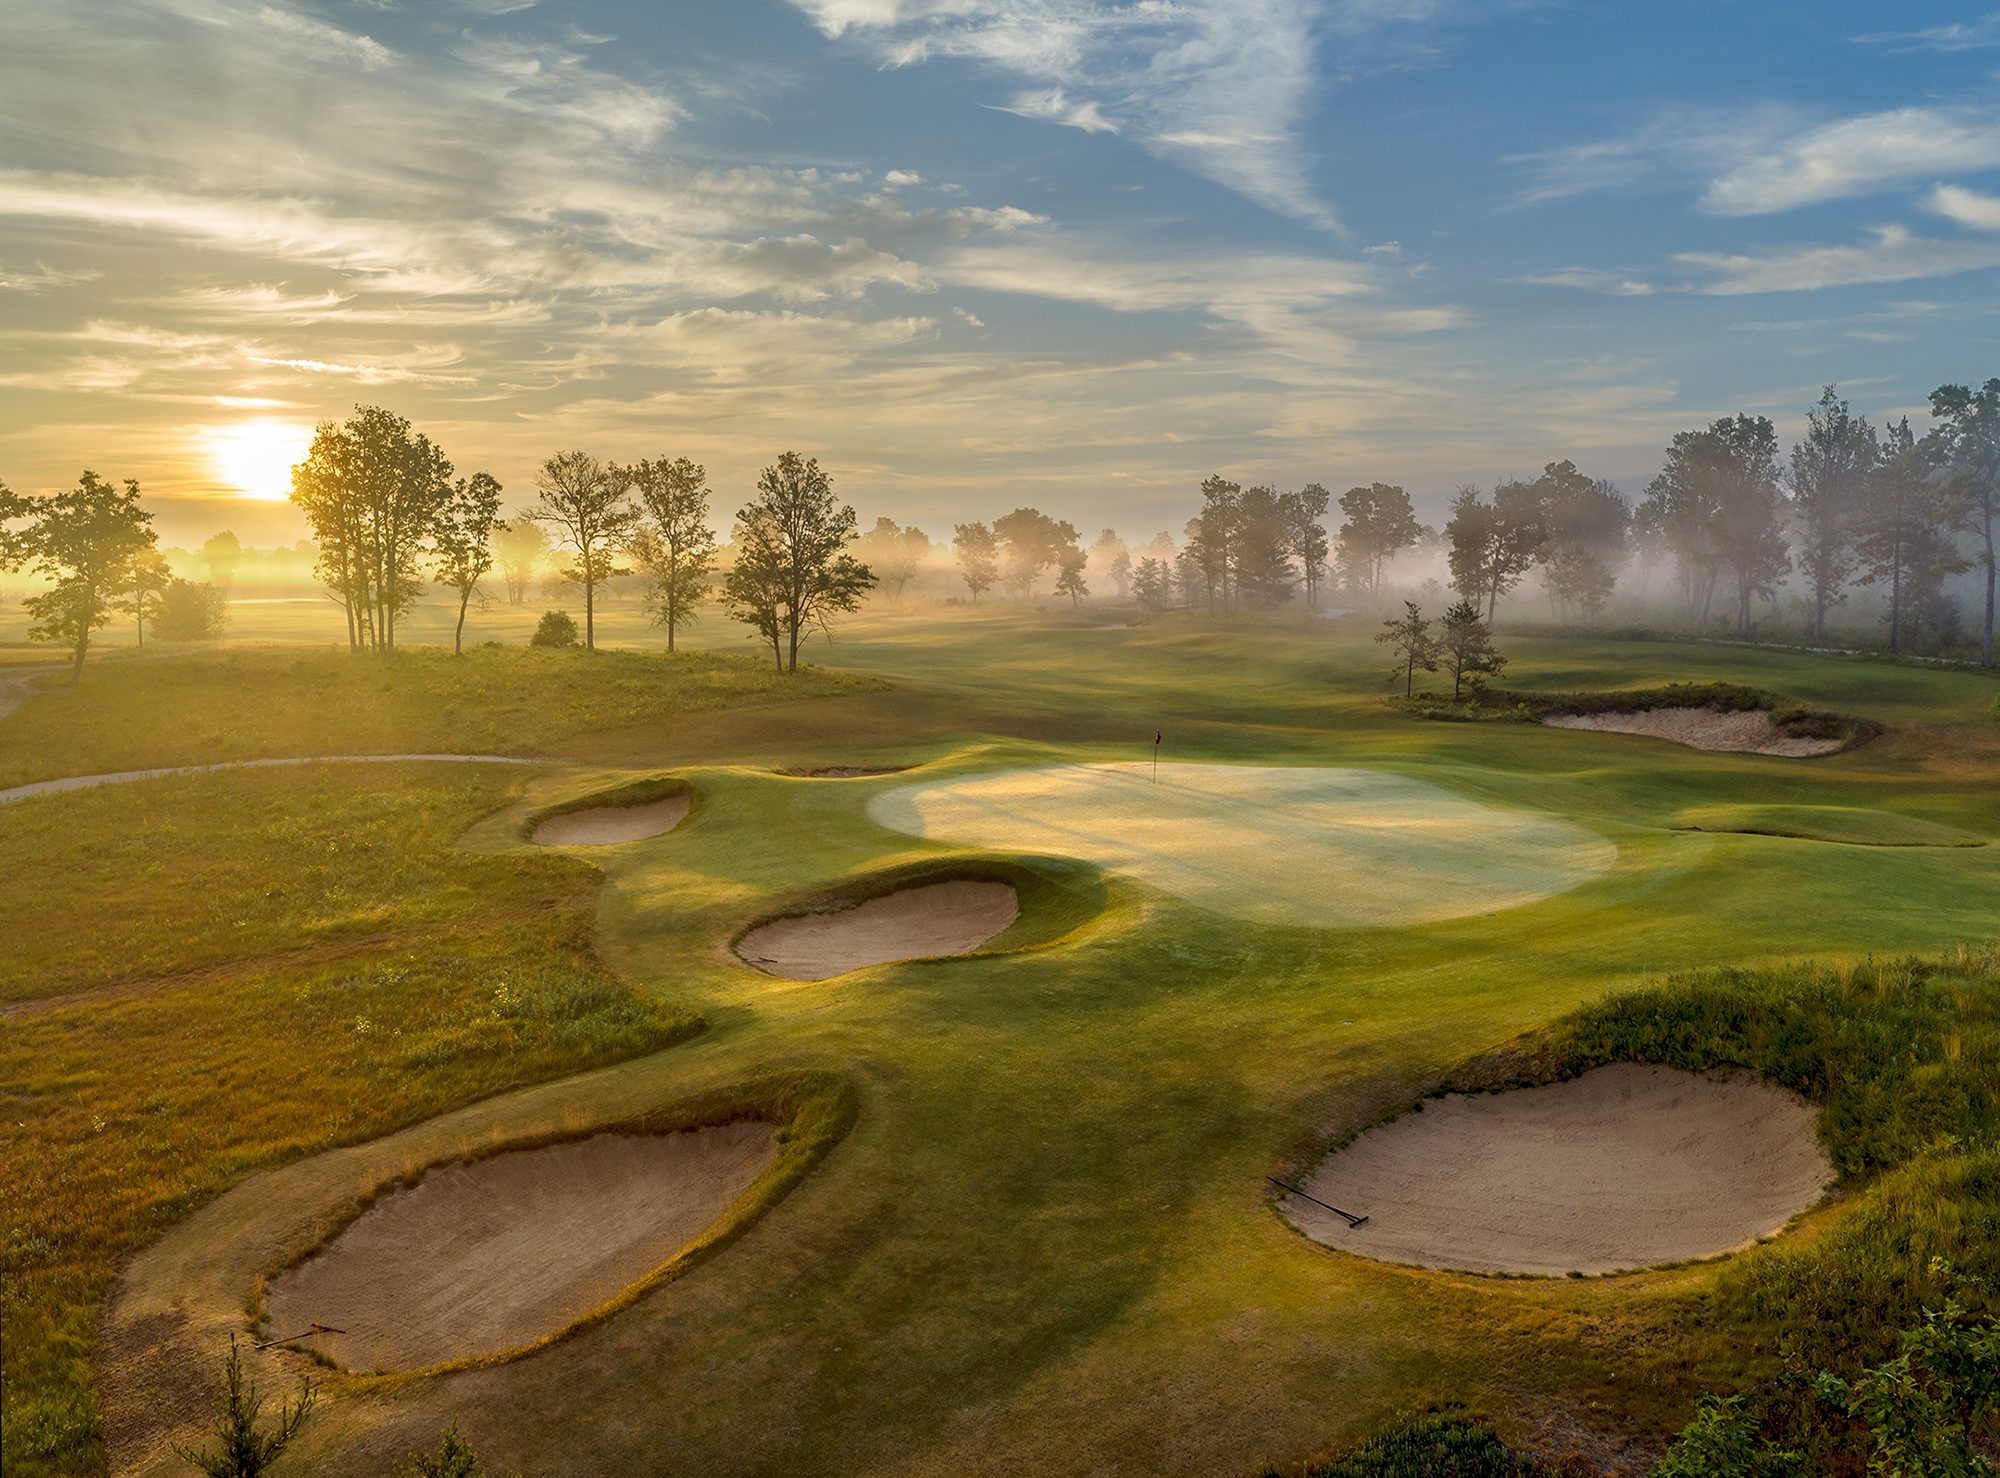 Sunrise on a misty and mystical morning at The Loop at Forest Dunes.  This view is looking back over the 12th green on the Black Course which also serves at the 6th green of the Red Course.  A wonderful reversible golf course designed by tom doak.